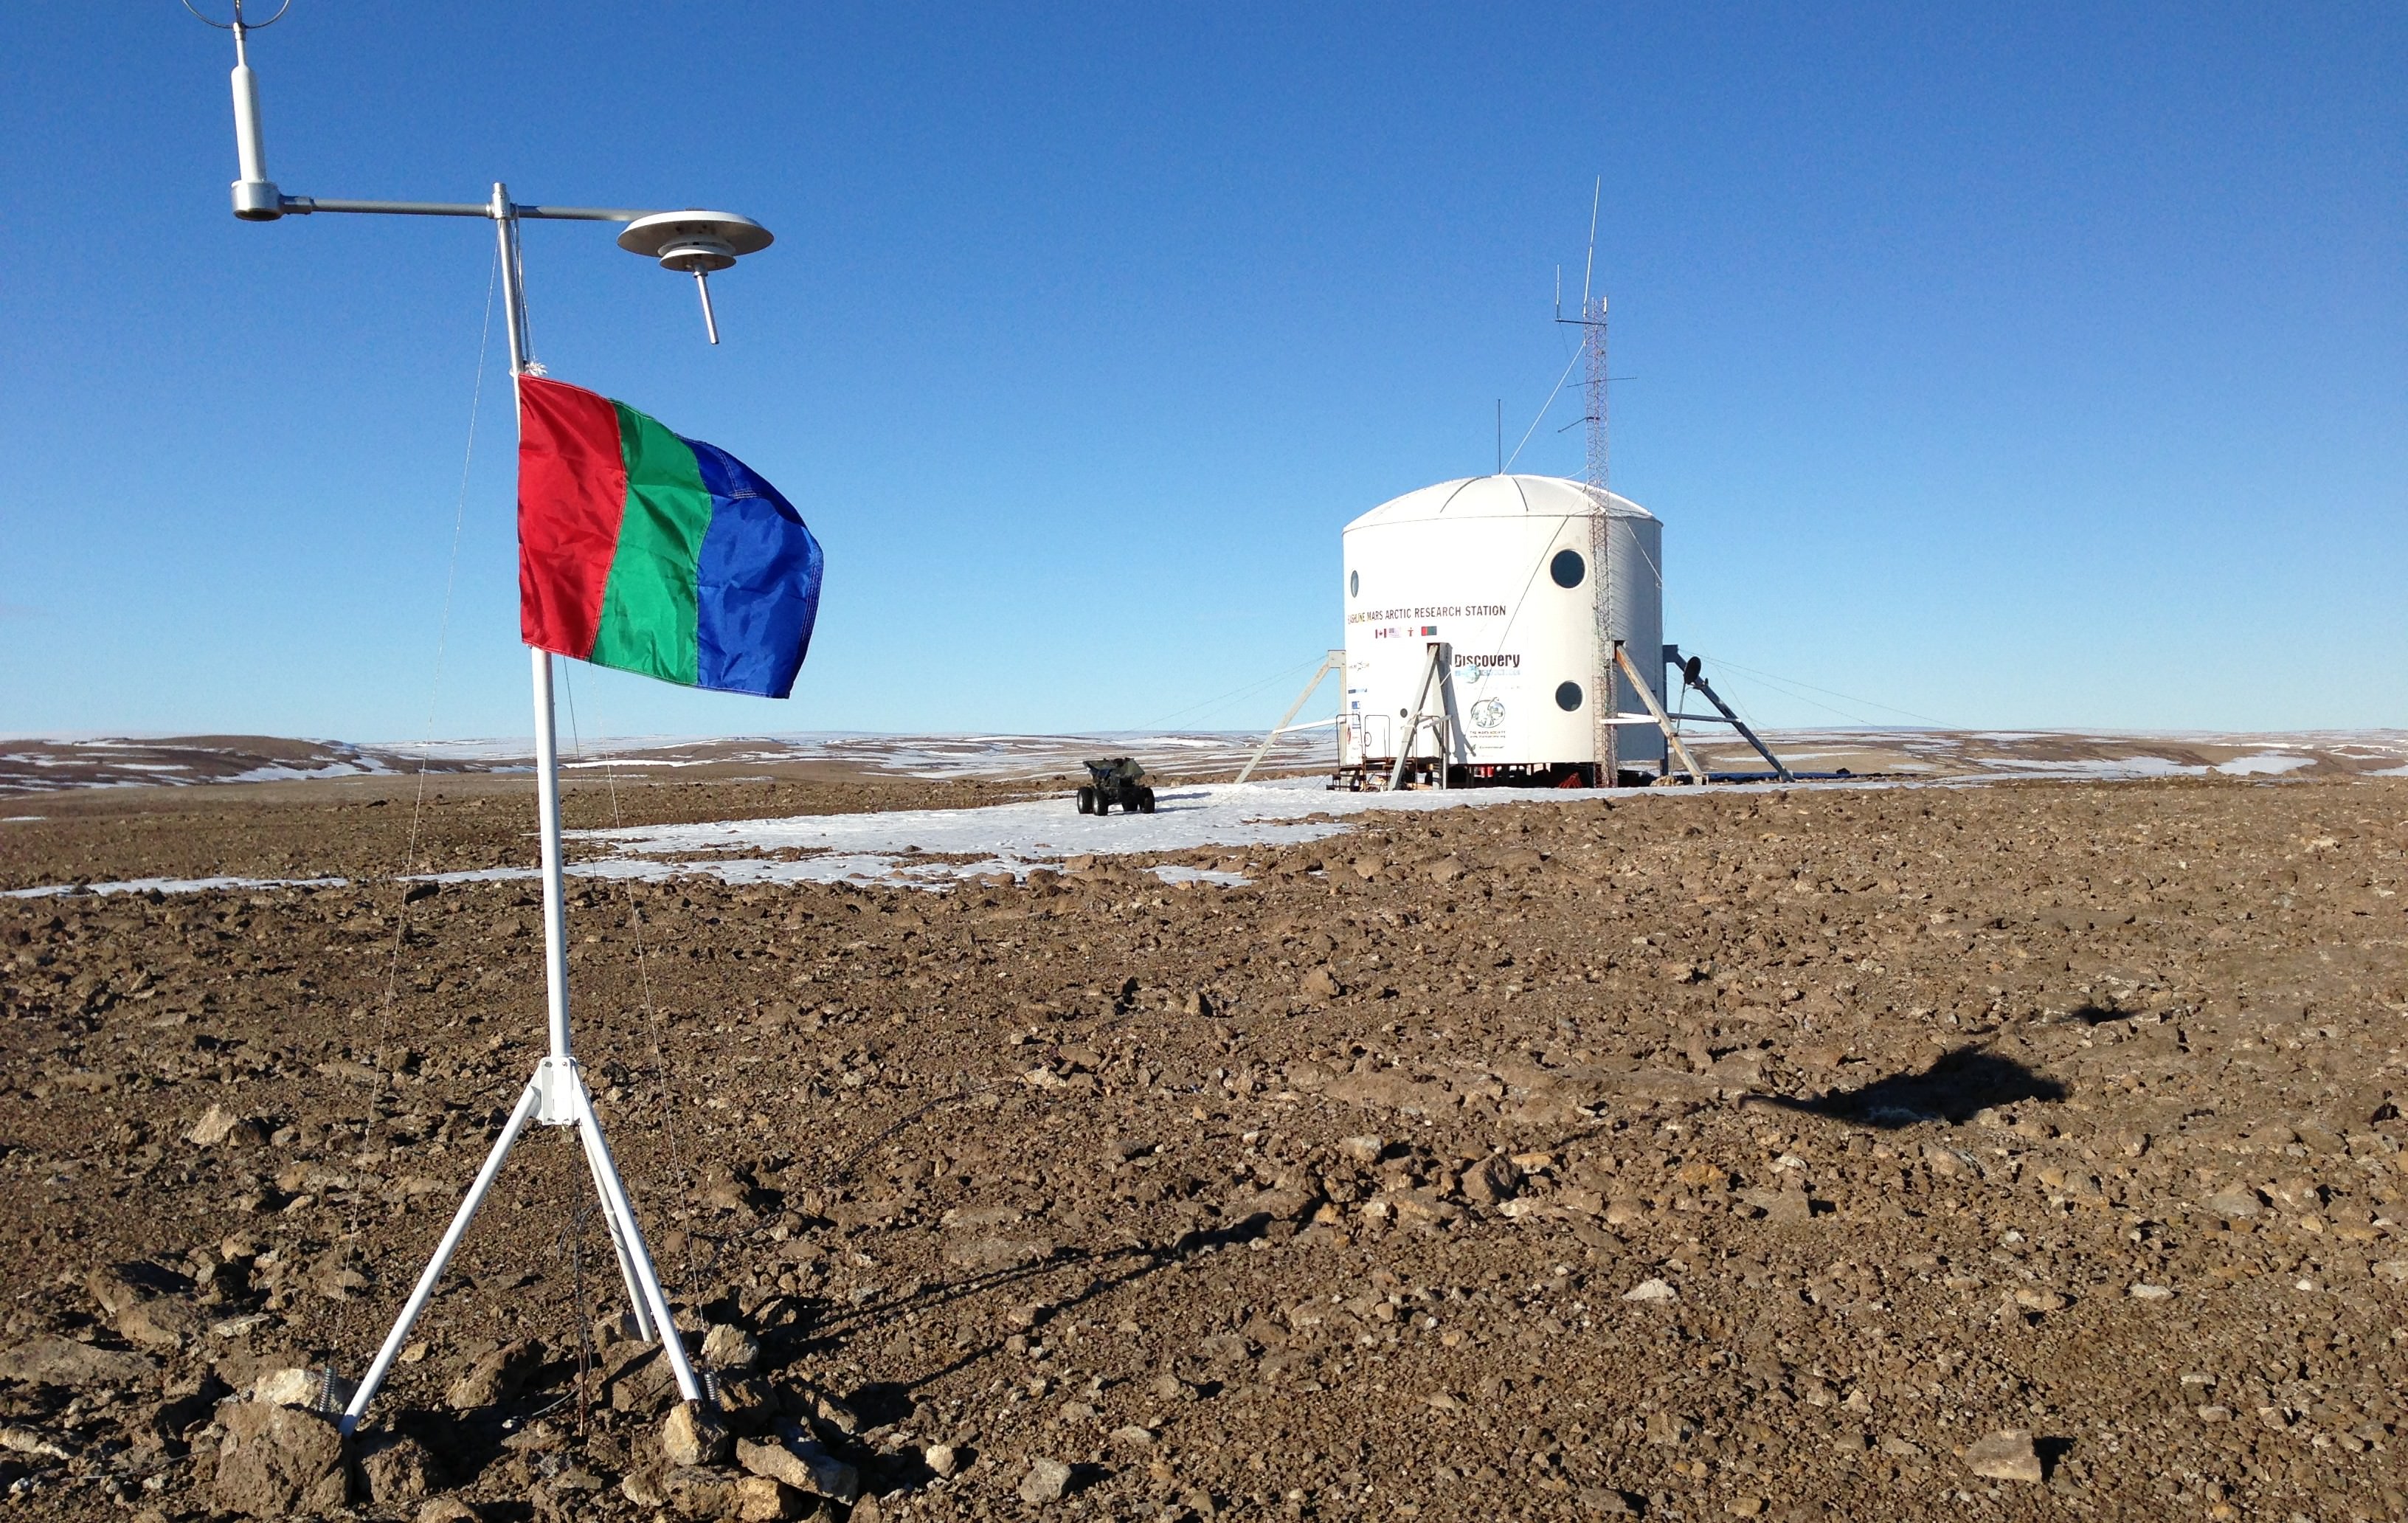 Mars Desert Research Station (MDRS) Archives - Universe Today